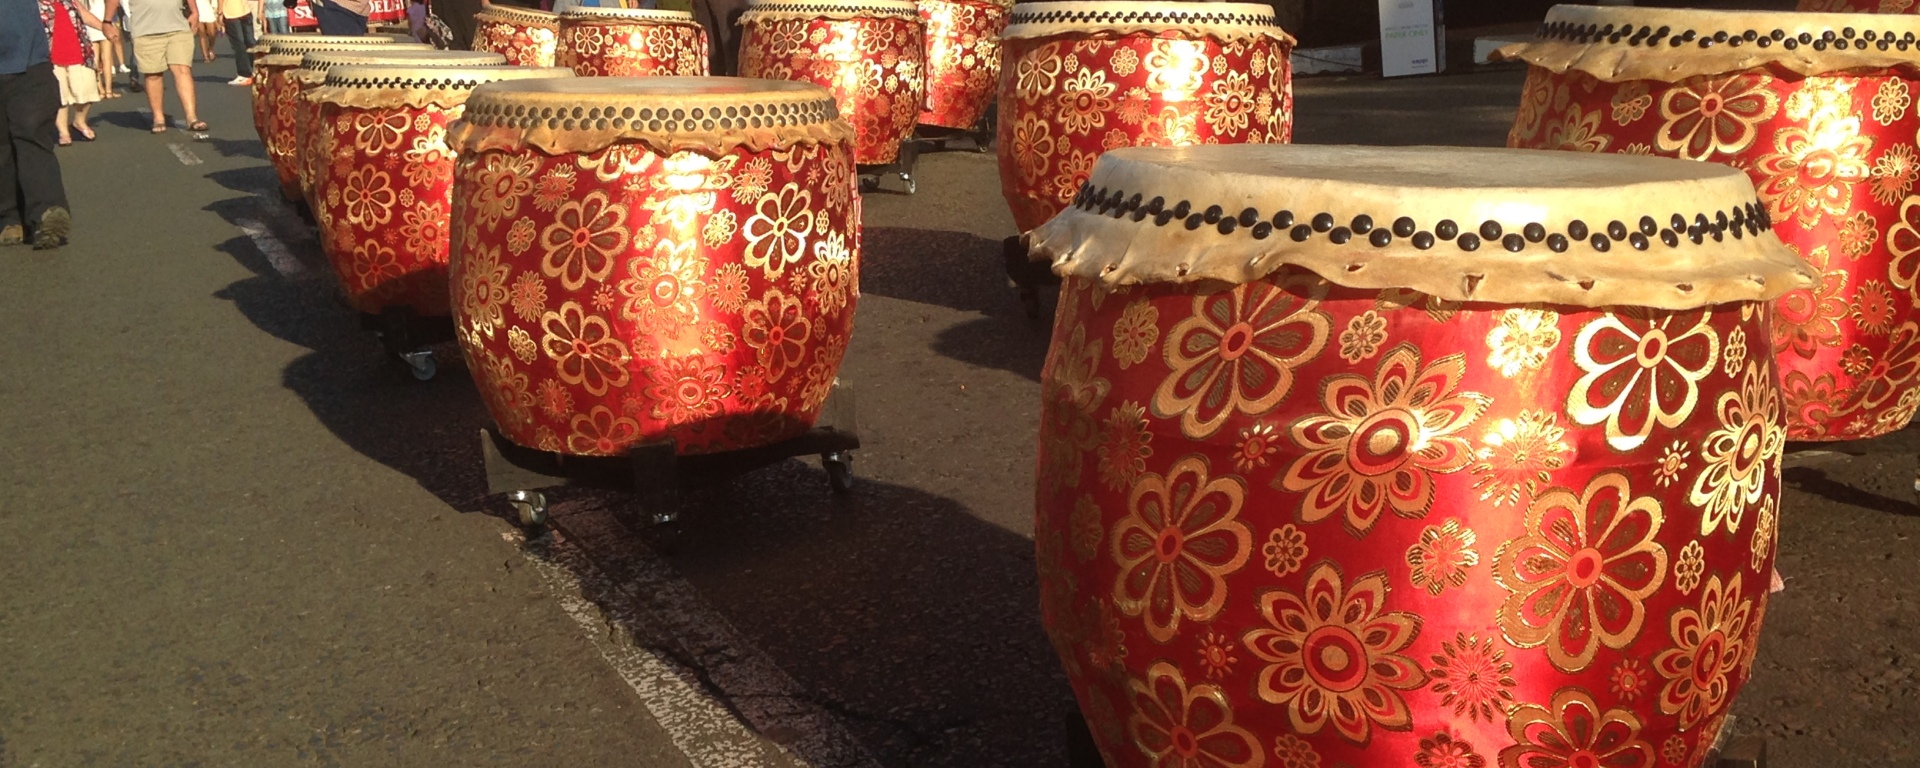 Chinese drums